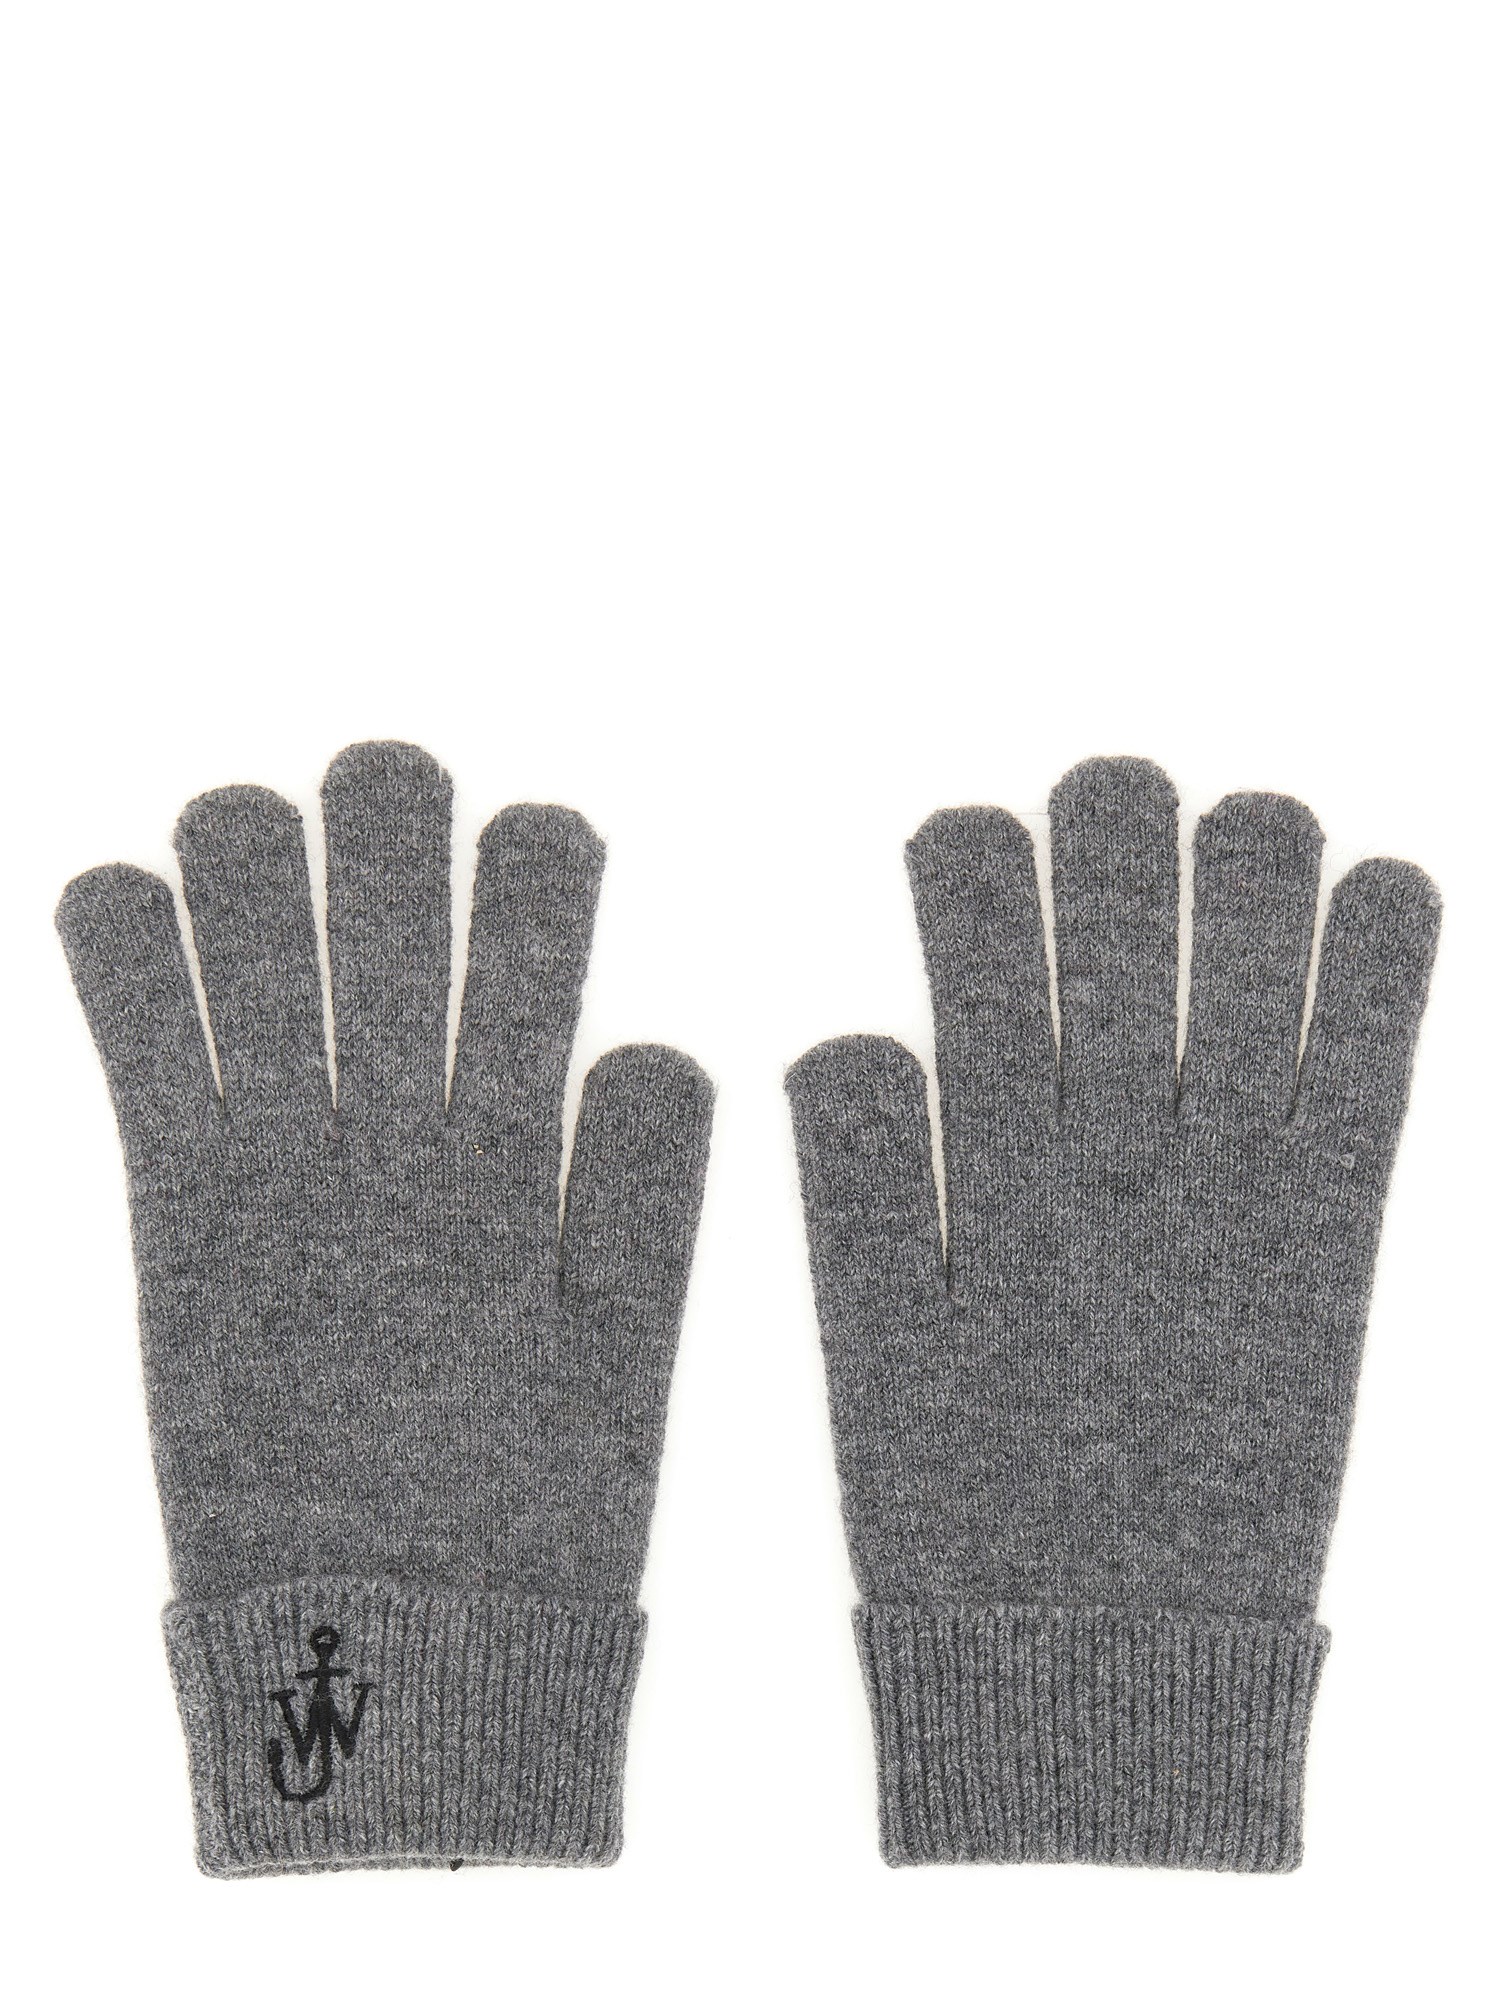 Jw Anderson jw anderson "anchor" gloves